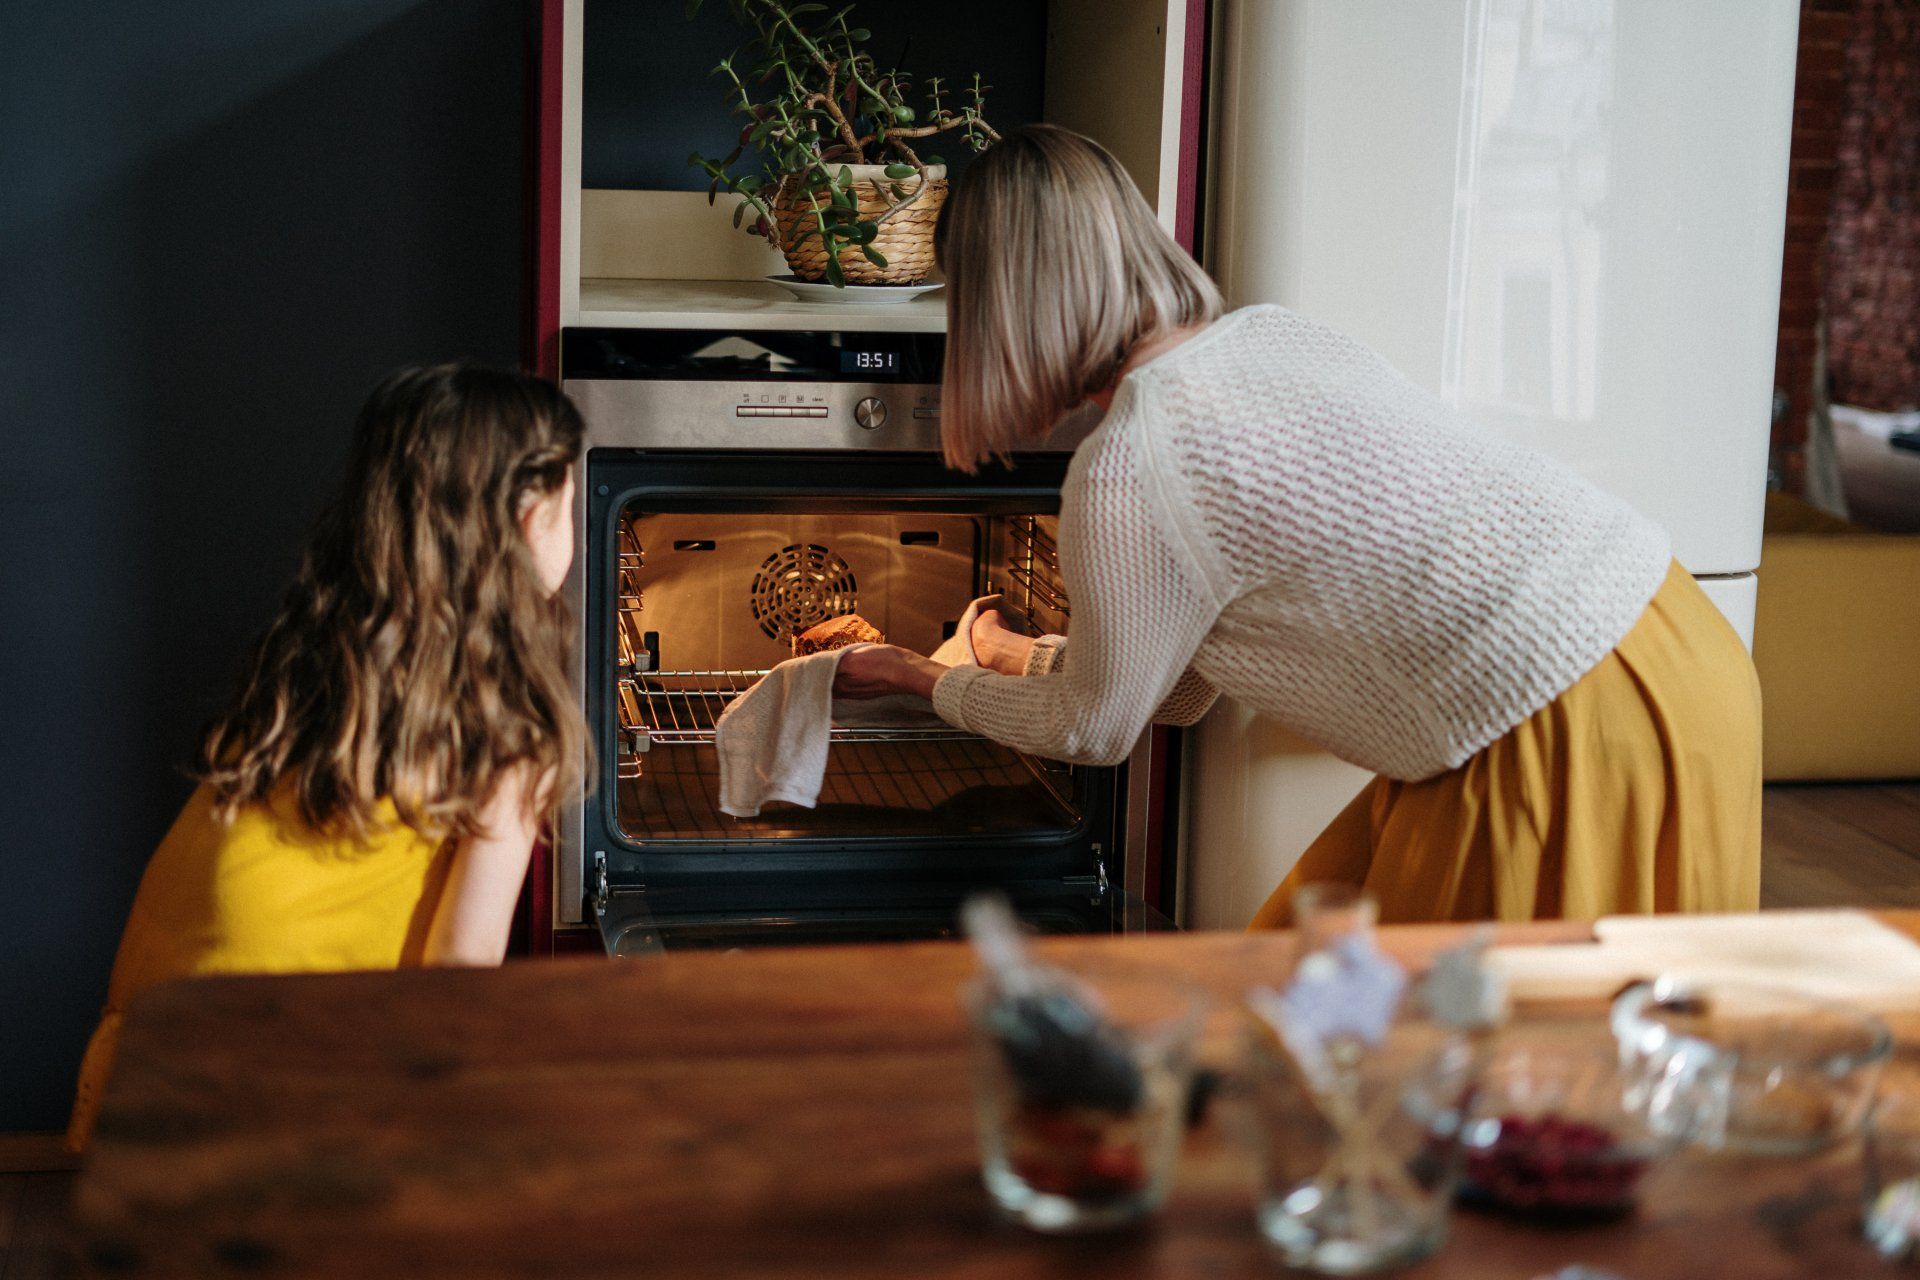 a woman and a little girl are looking into an oven .